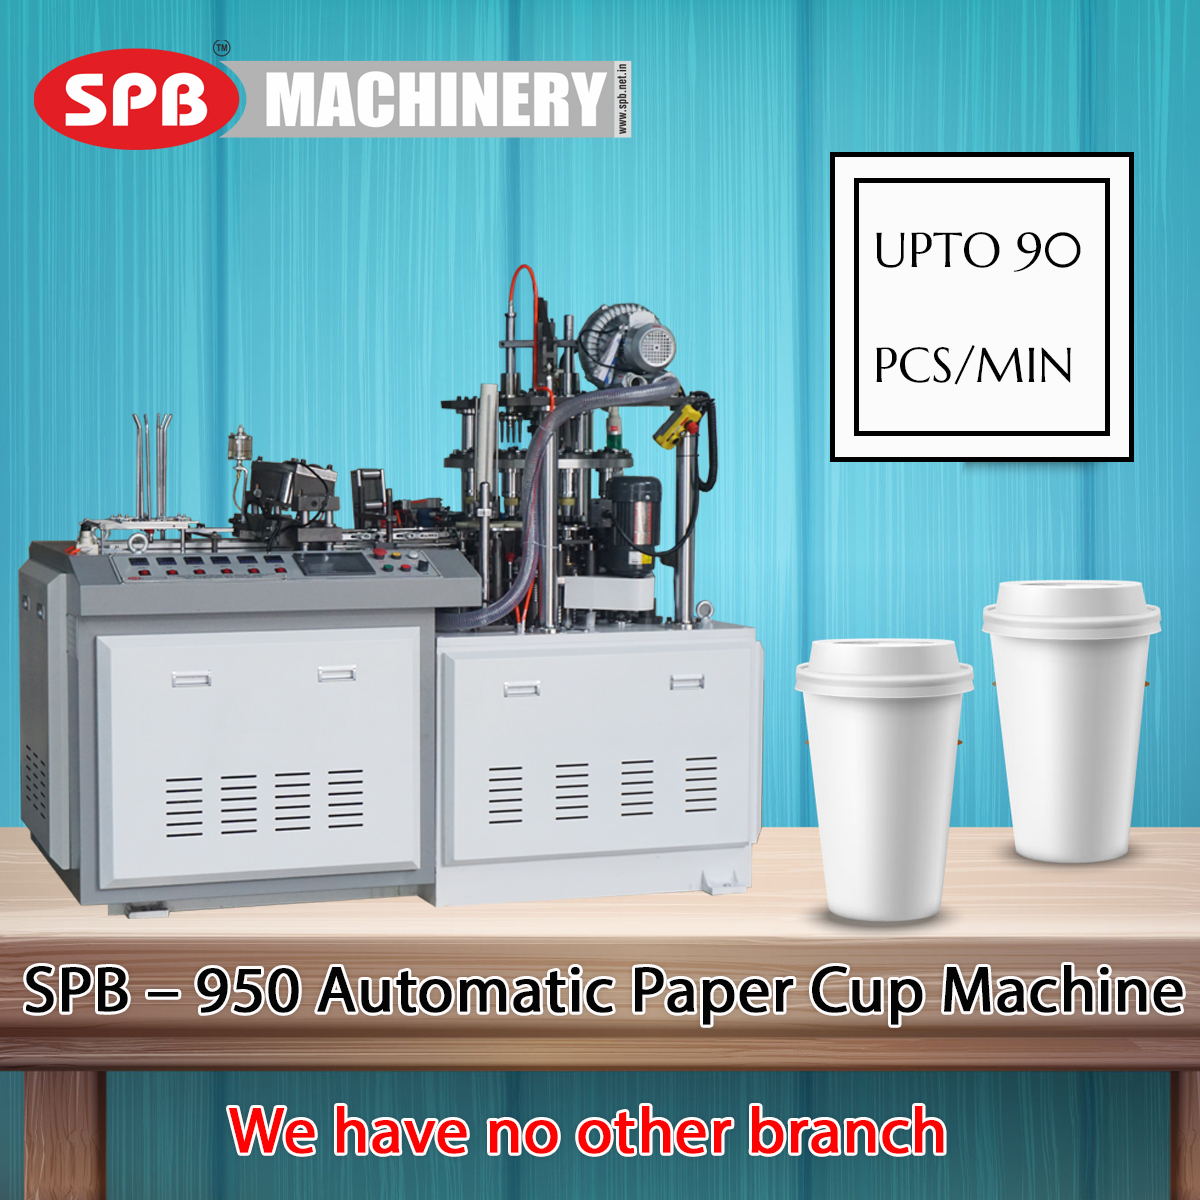 Low-Cost Paper Cup Machine in India – SPB MACHINERY